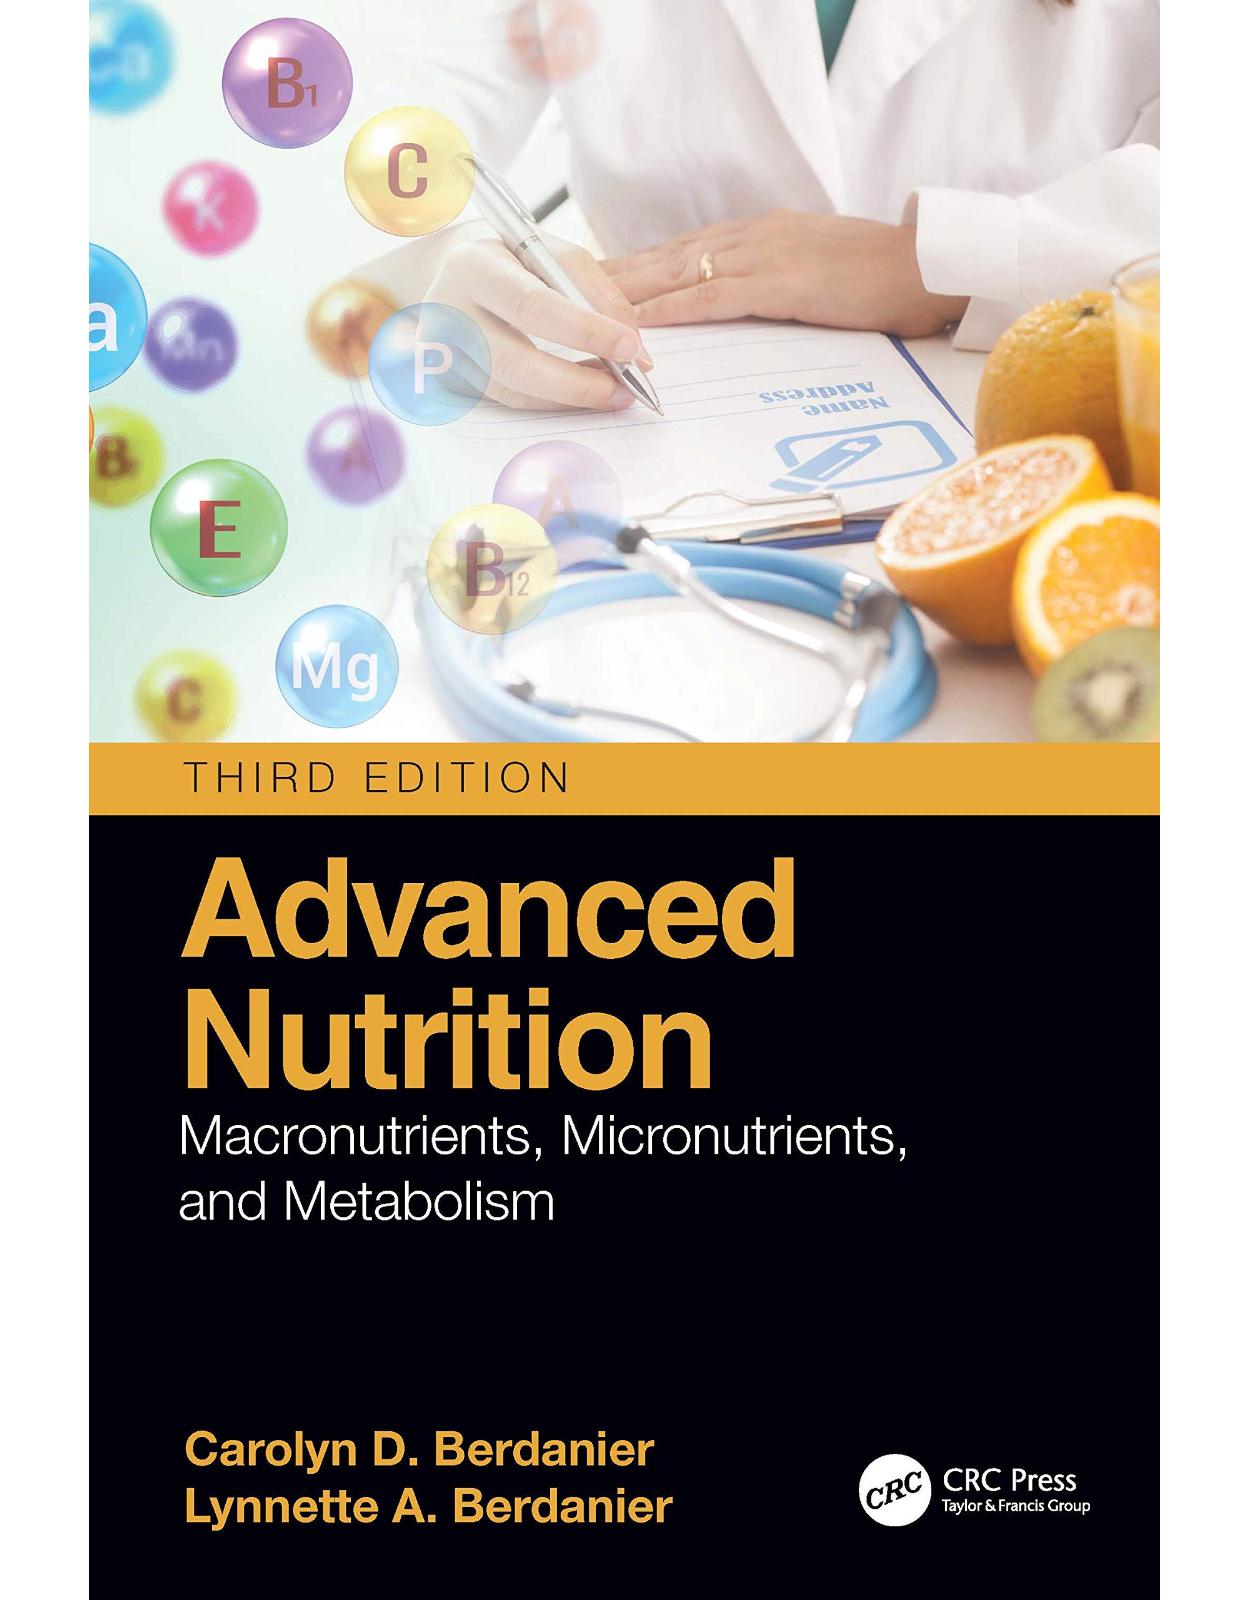 Advanced Nutrition: Macronutrients, Micronutrients, and Metabolism